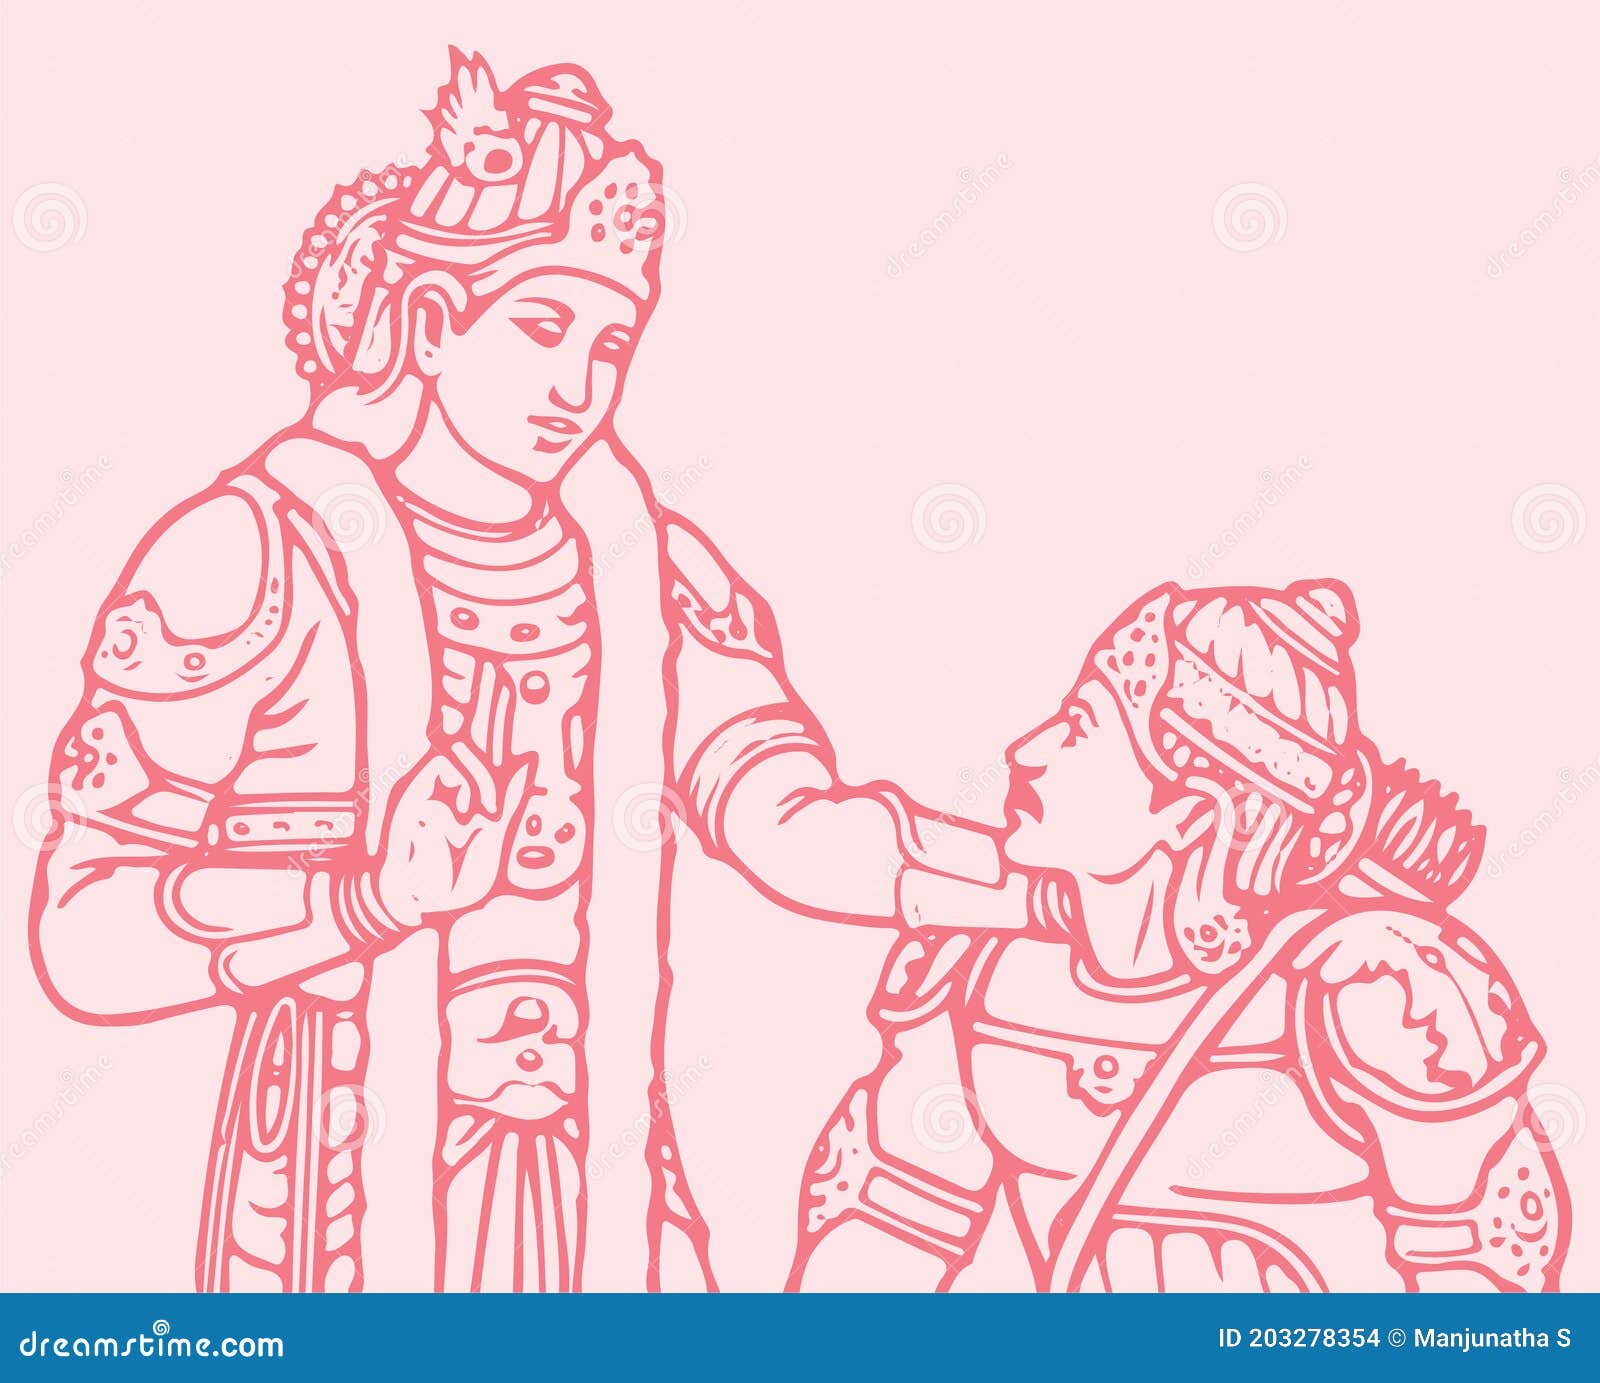 How to Draw Lord Krishna | In this tutorial let me show you … | Flickr